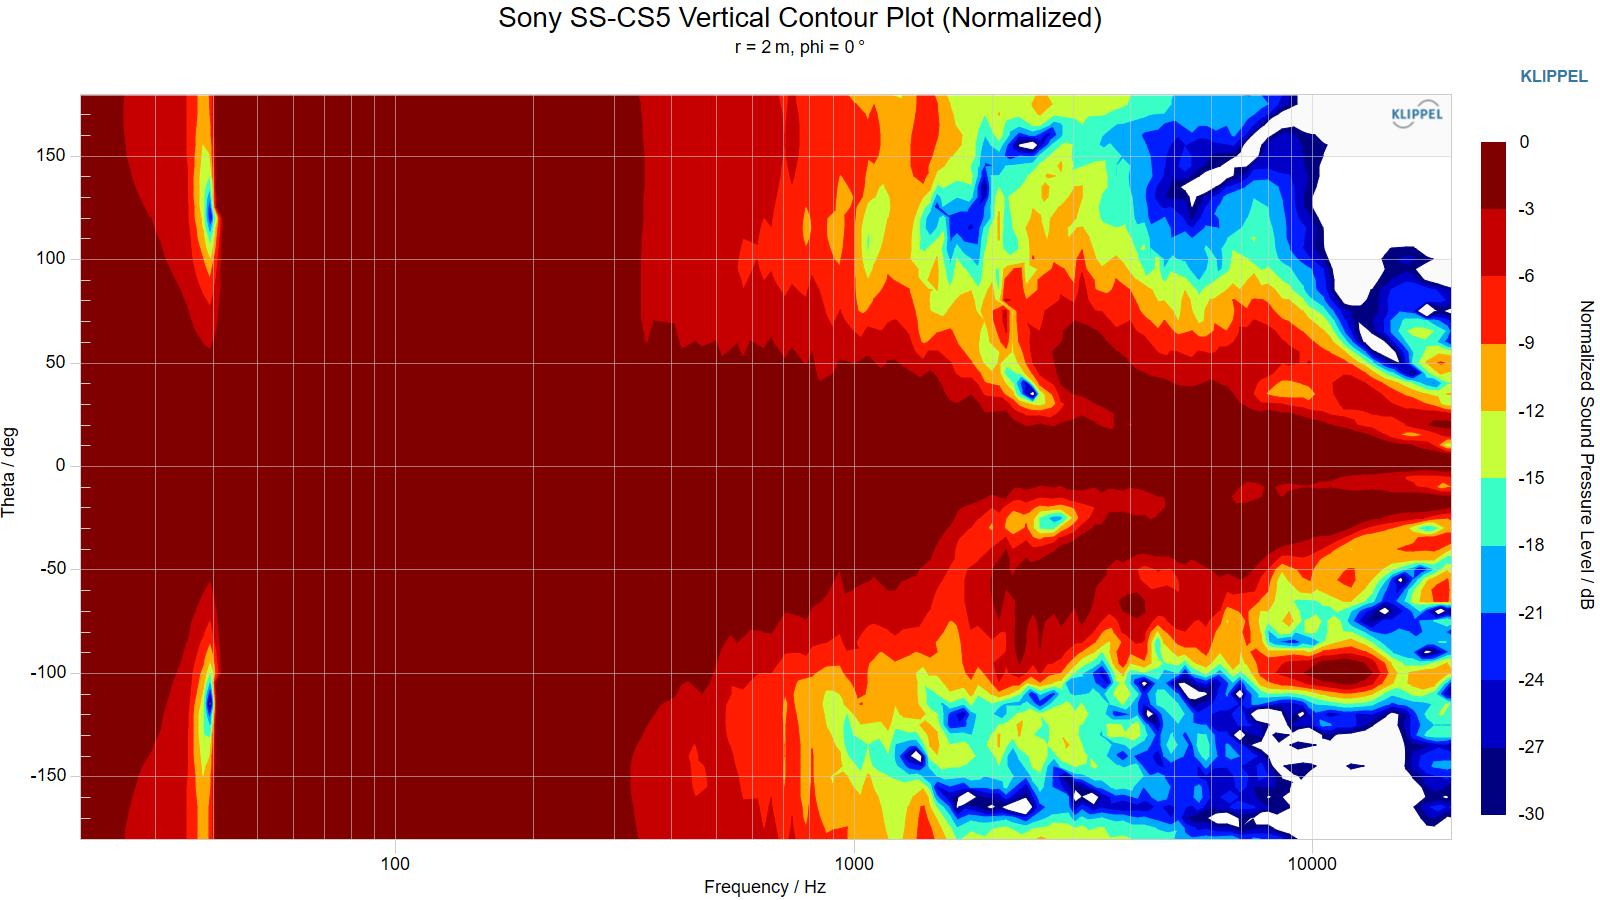 Sony%20SS-CS5%20Vertical%20Contour%20Plot%20%28Normalized%29.png